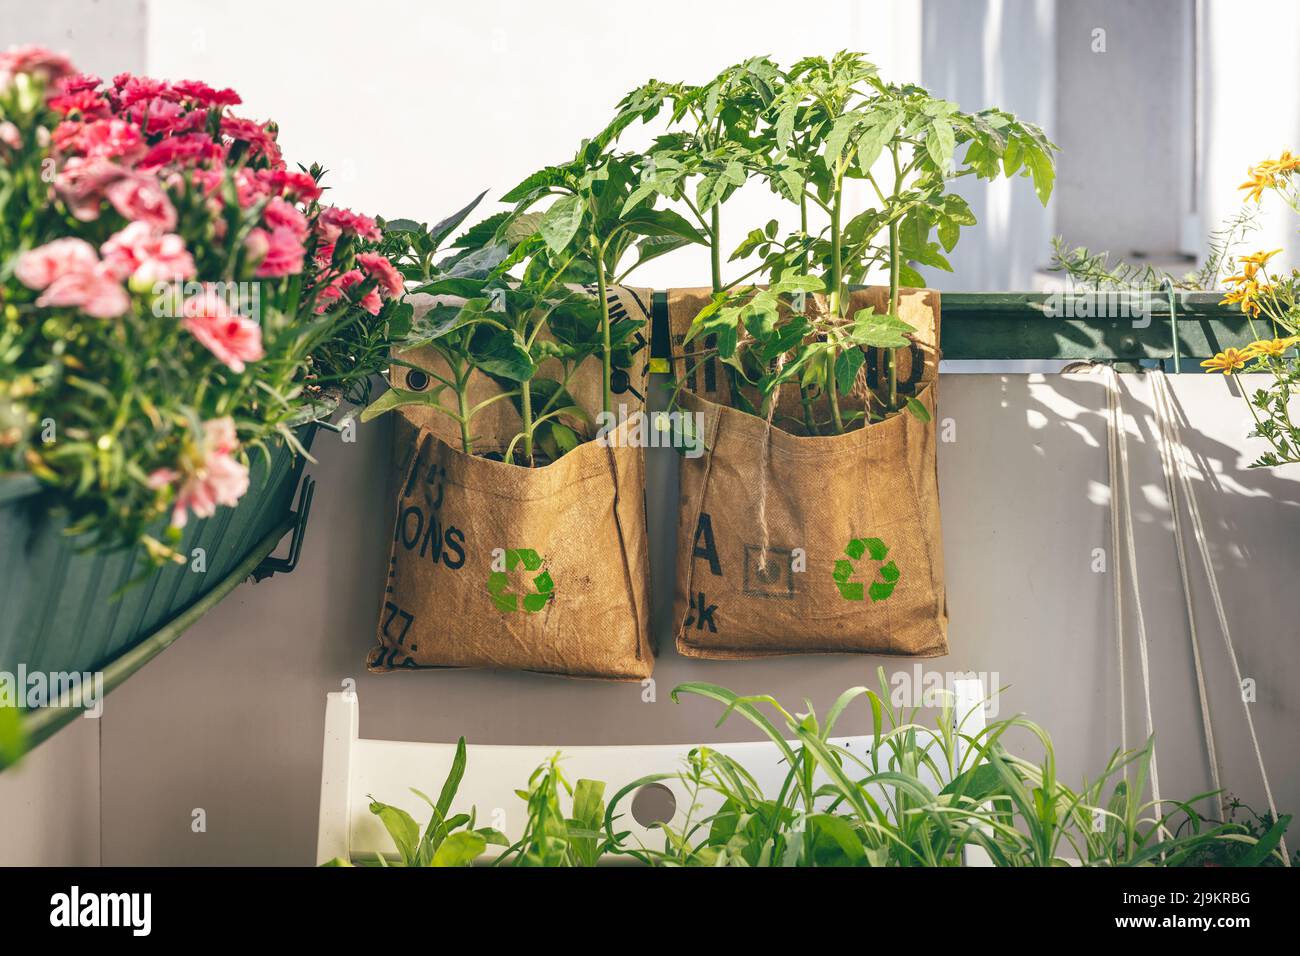 Tomatoes and sunflowers grow in reusable plant bags on balcony. Tee-big-bags were recycled by indian workers in India. Intelligent consumption of products Stock Photo